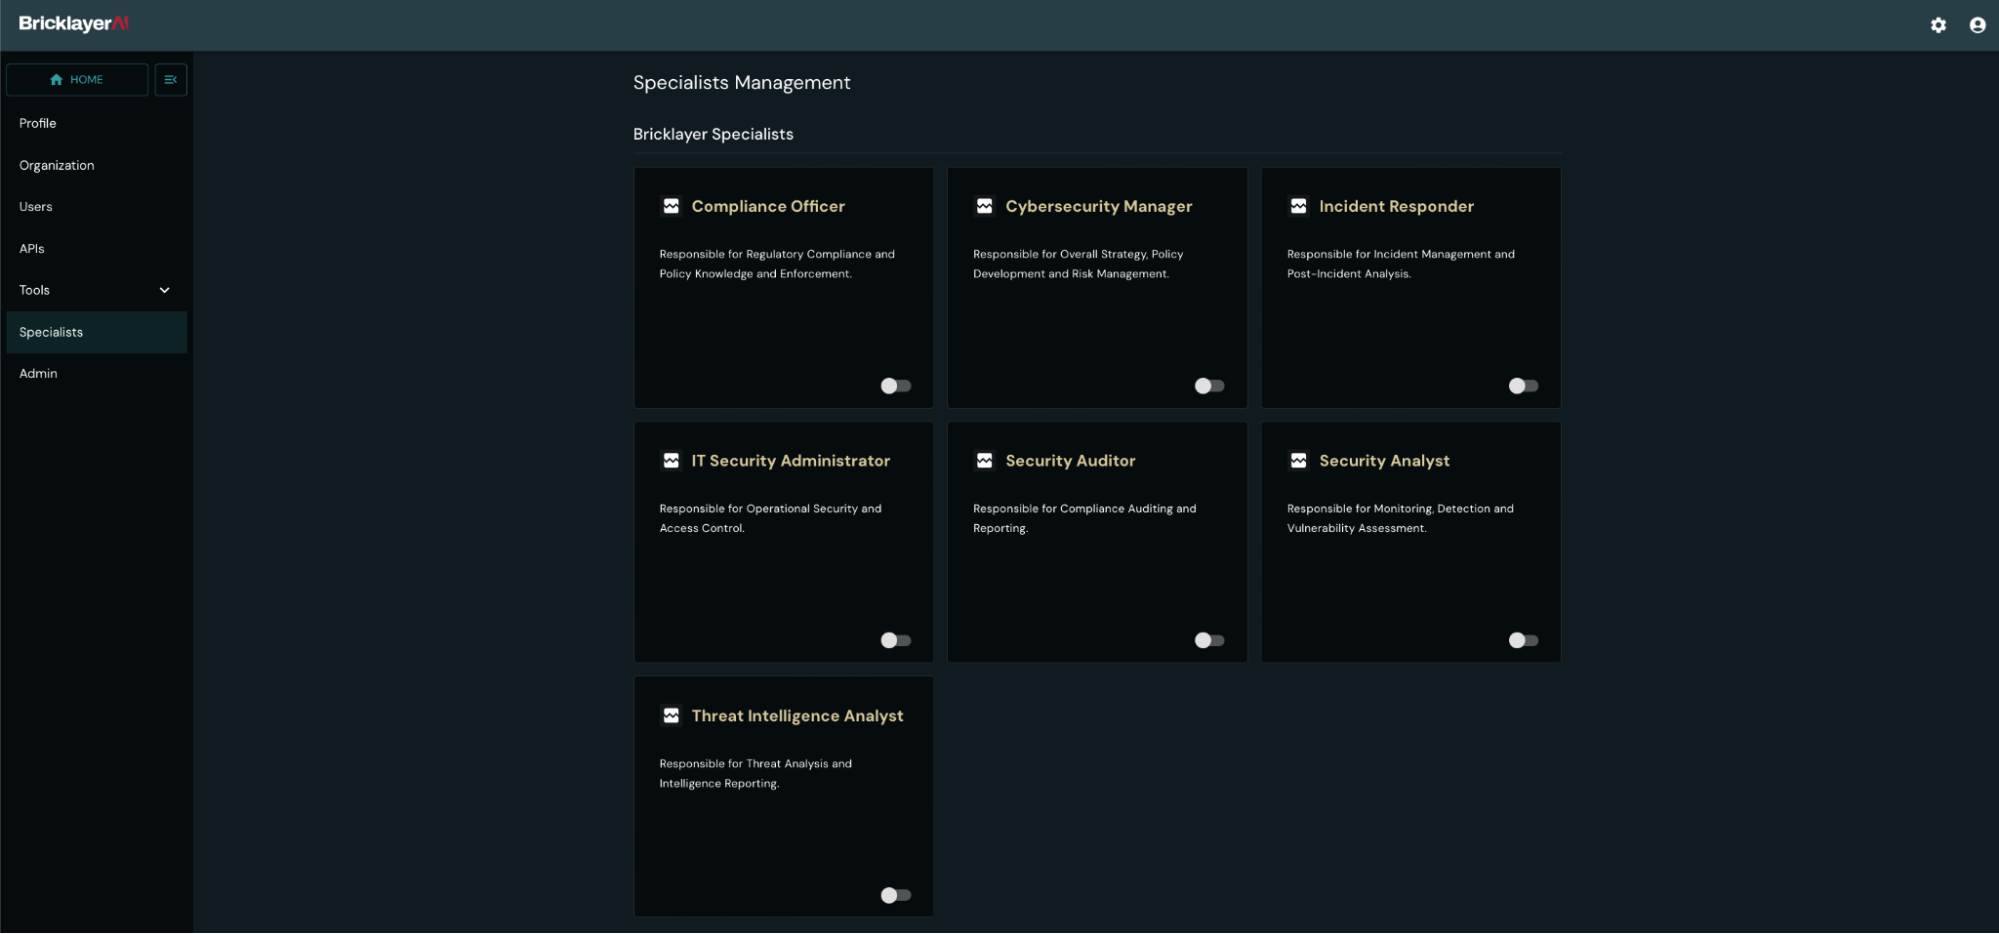 A Screenshot of the Specialists configuration area in Bricklayer.AI's platform